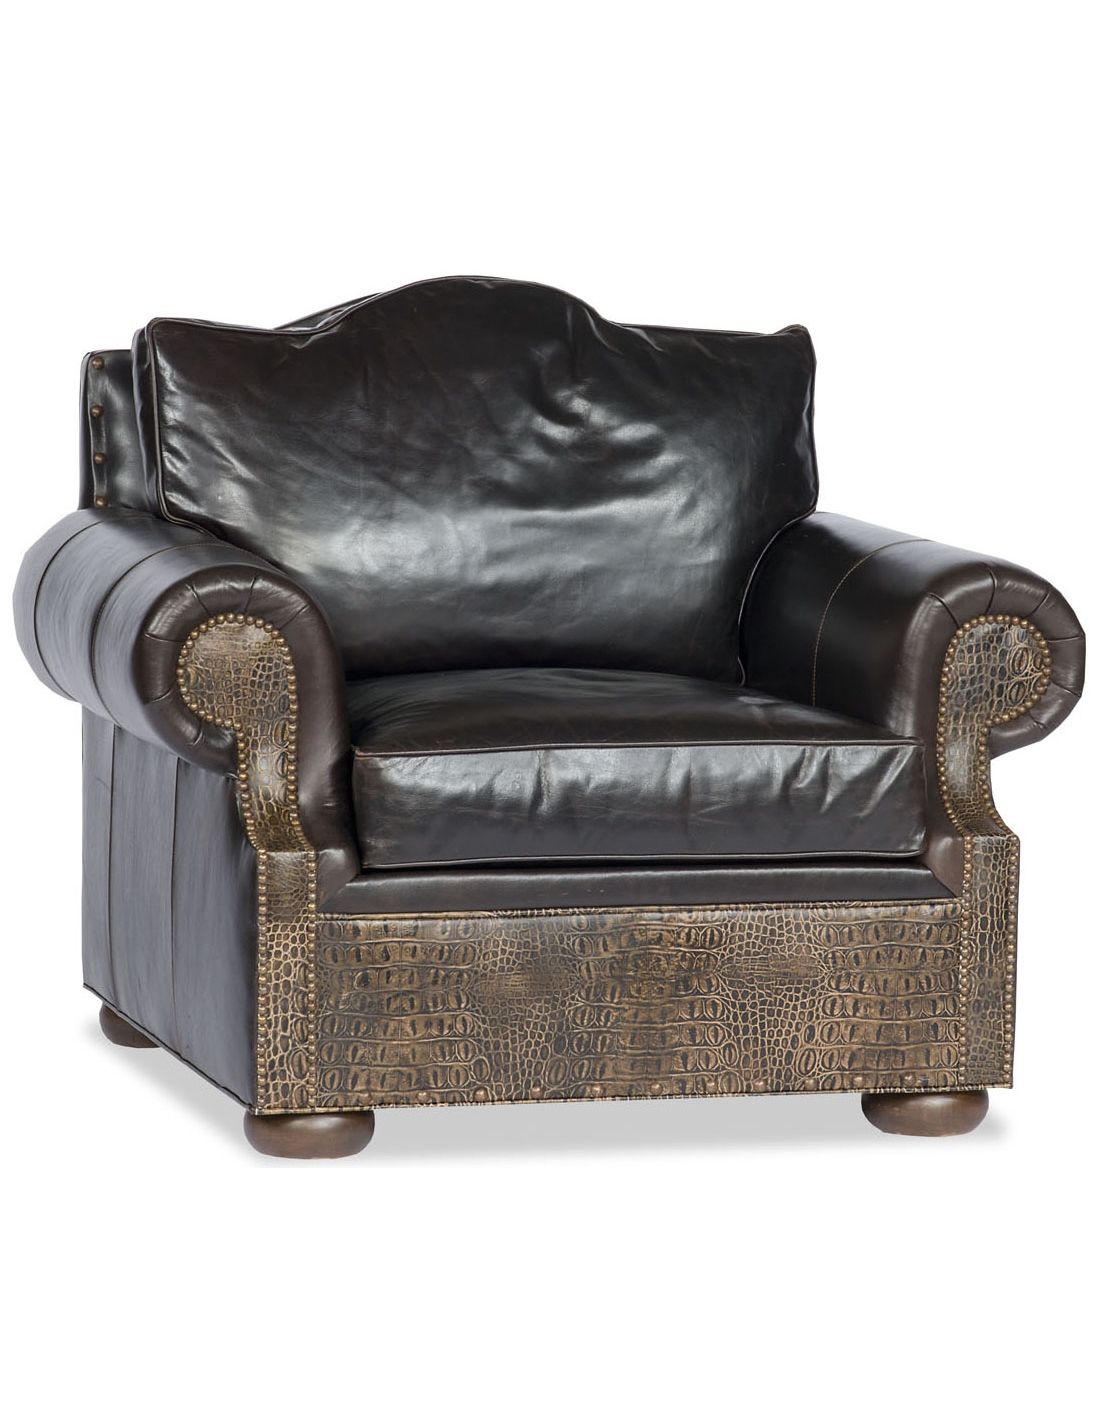 Comfy Leather Chair Two Tone, Big Comfy Leather Chair